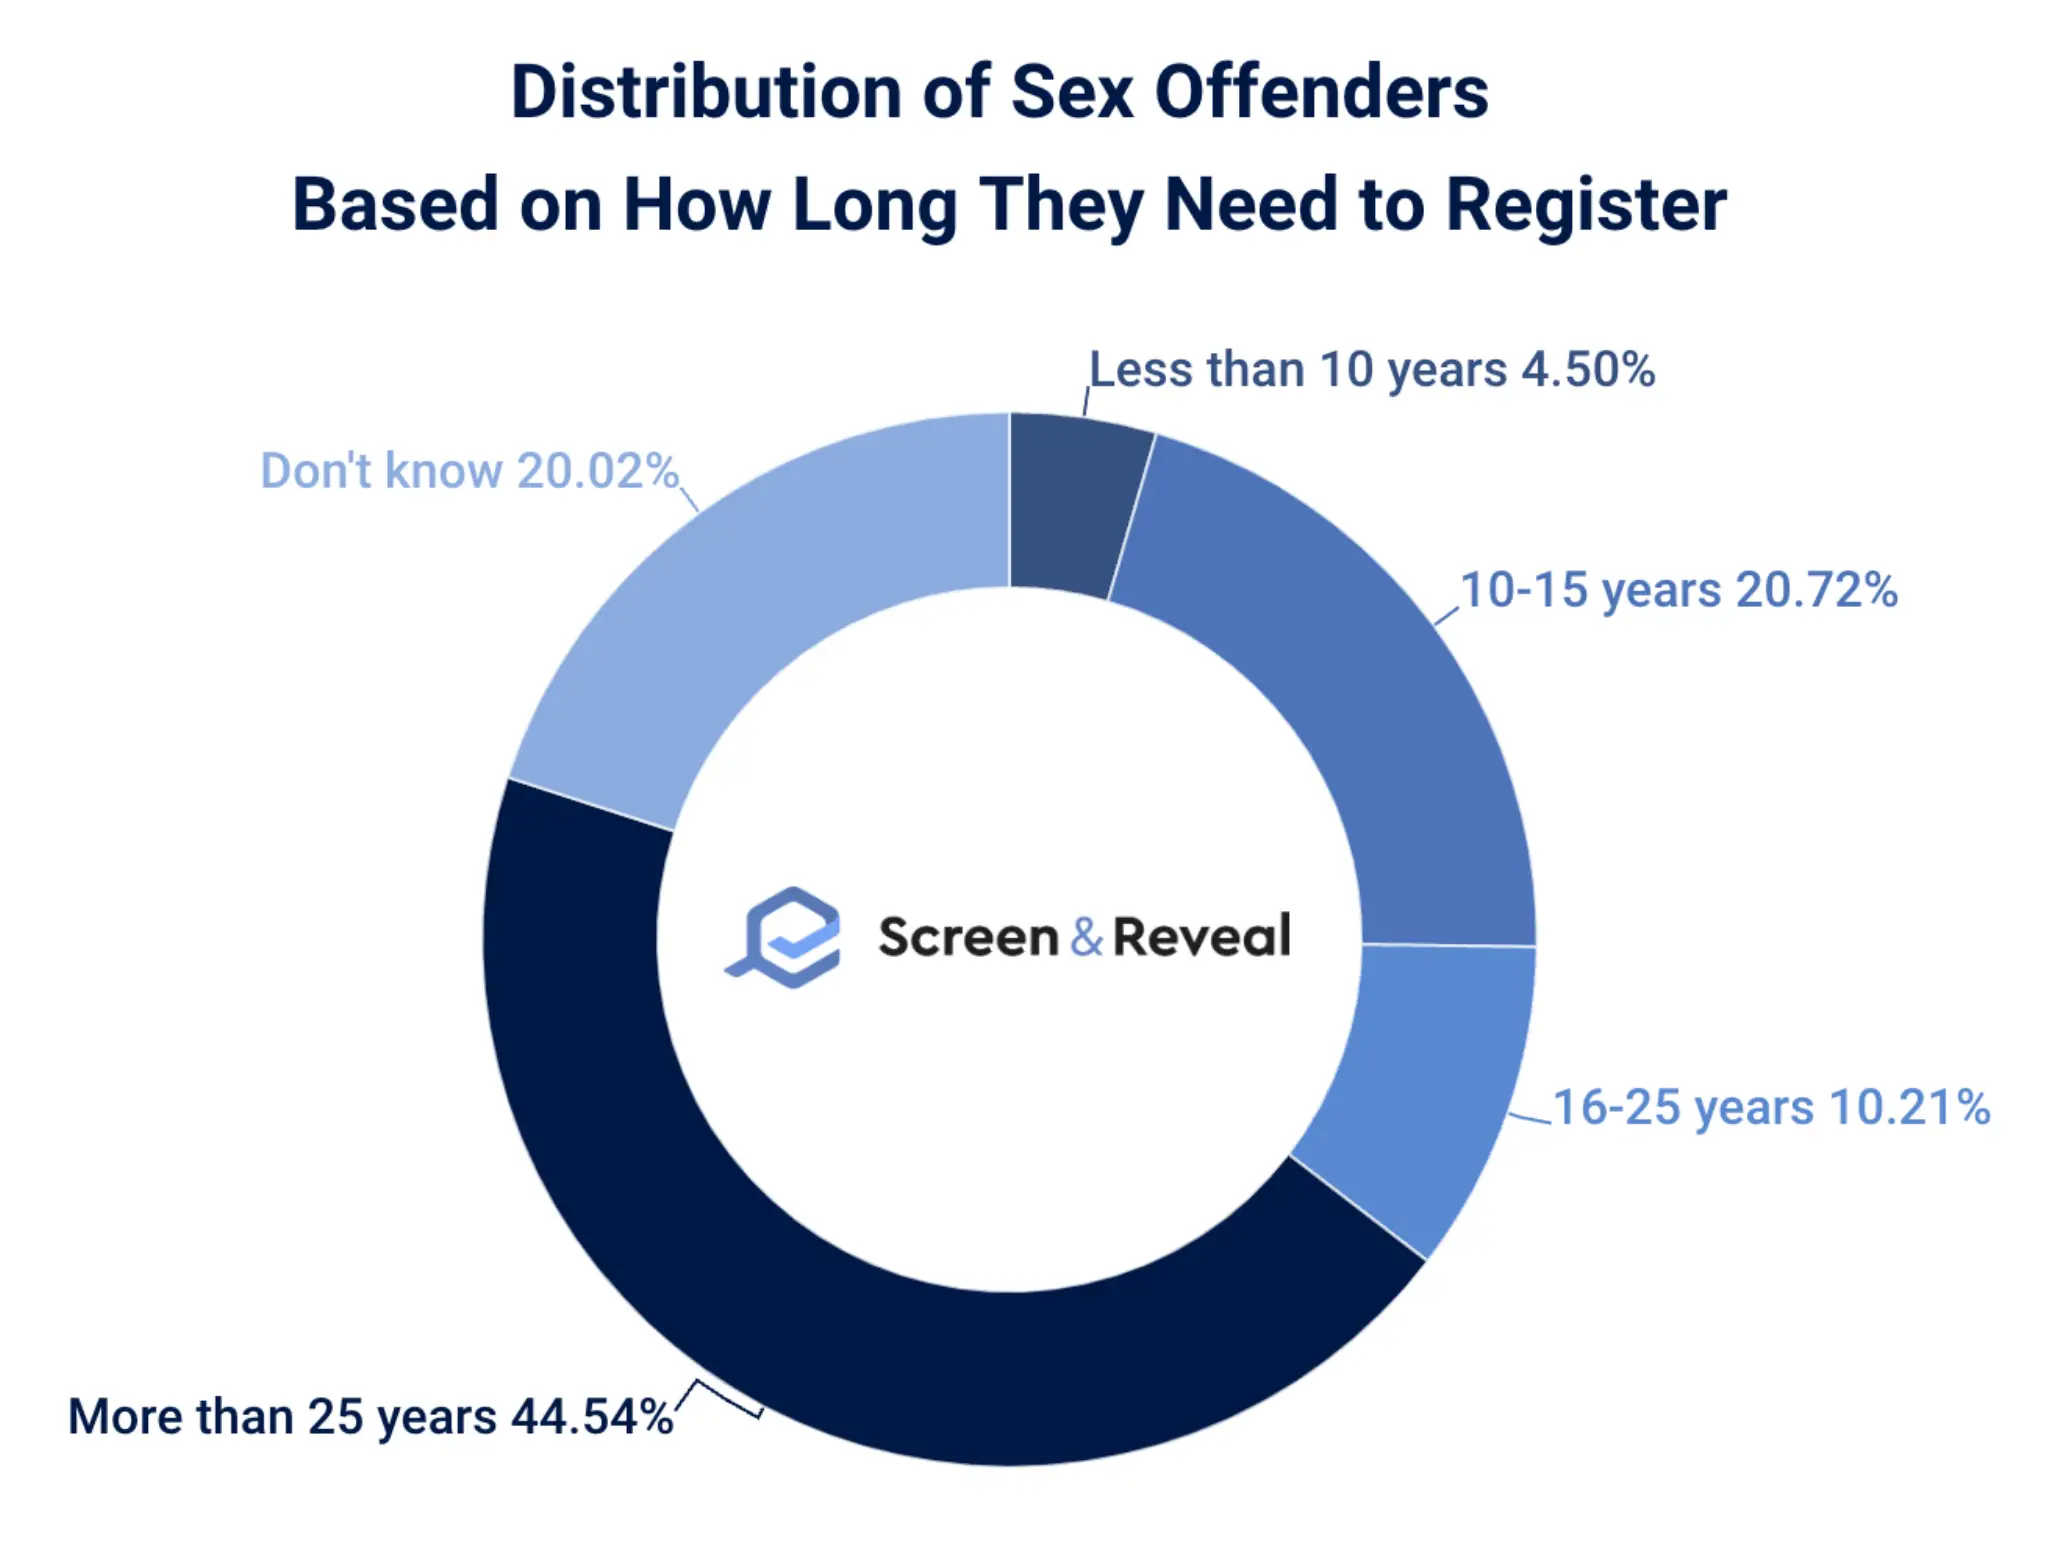 Distribution of Sex Offenders Based on How Long They Need to Register